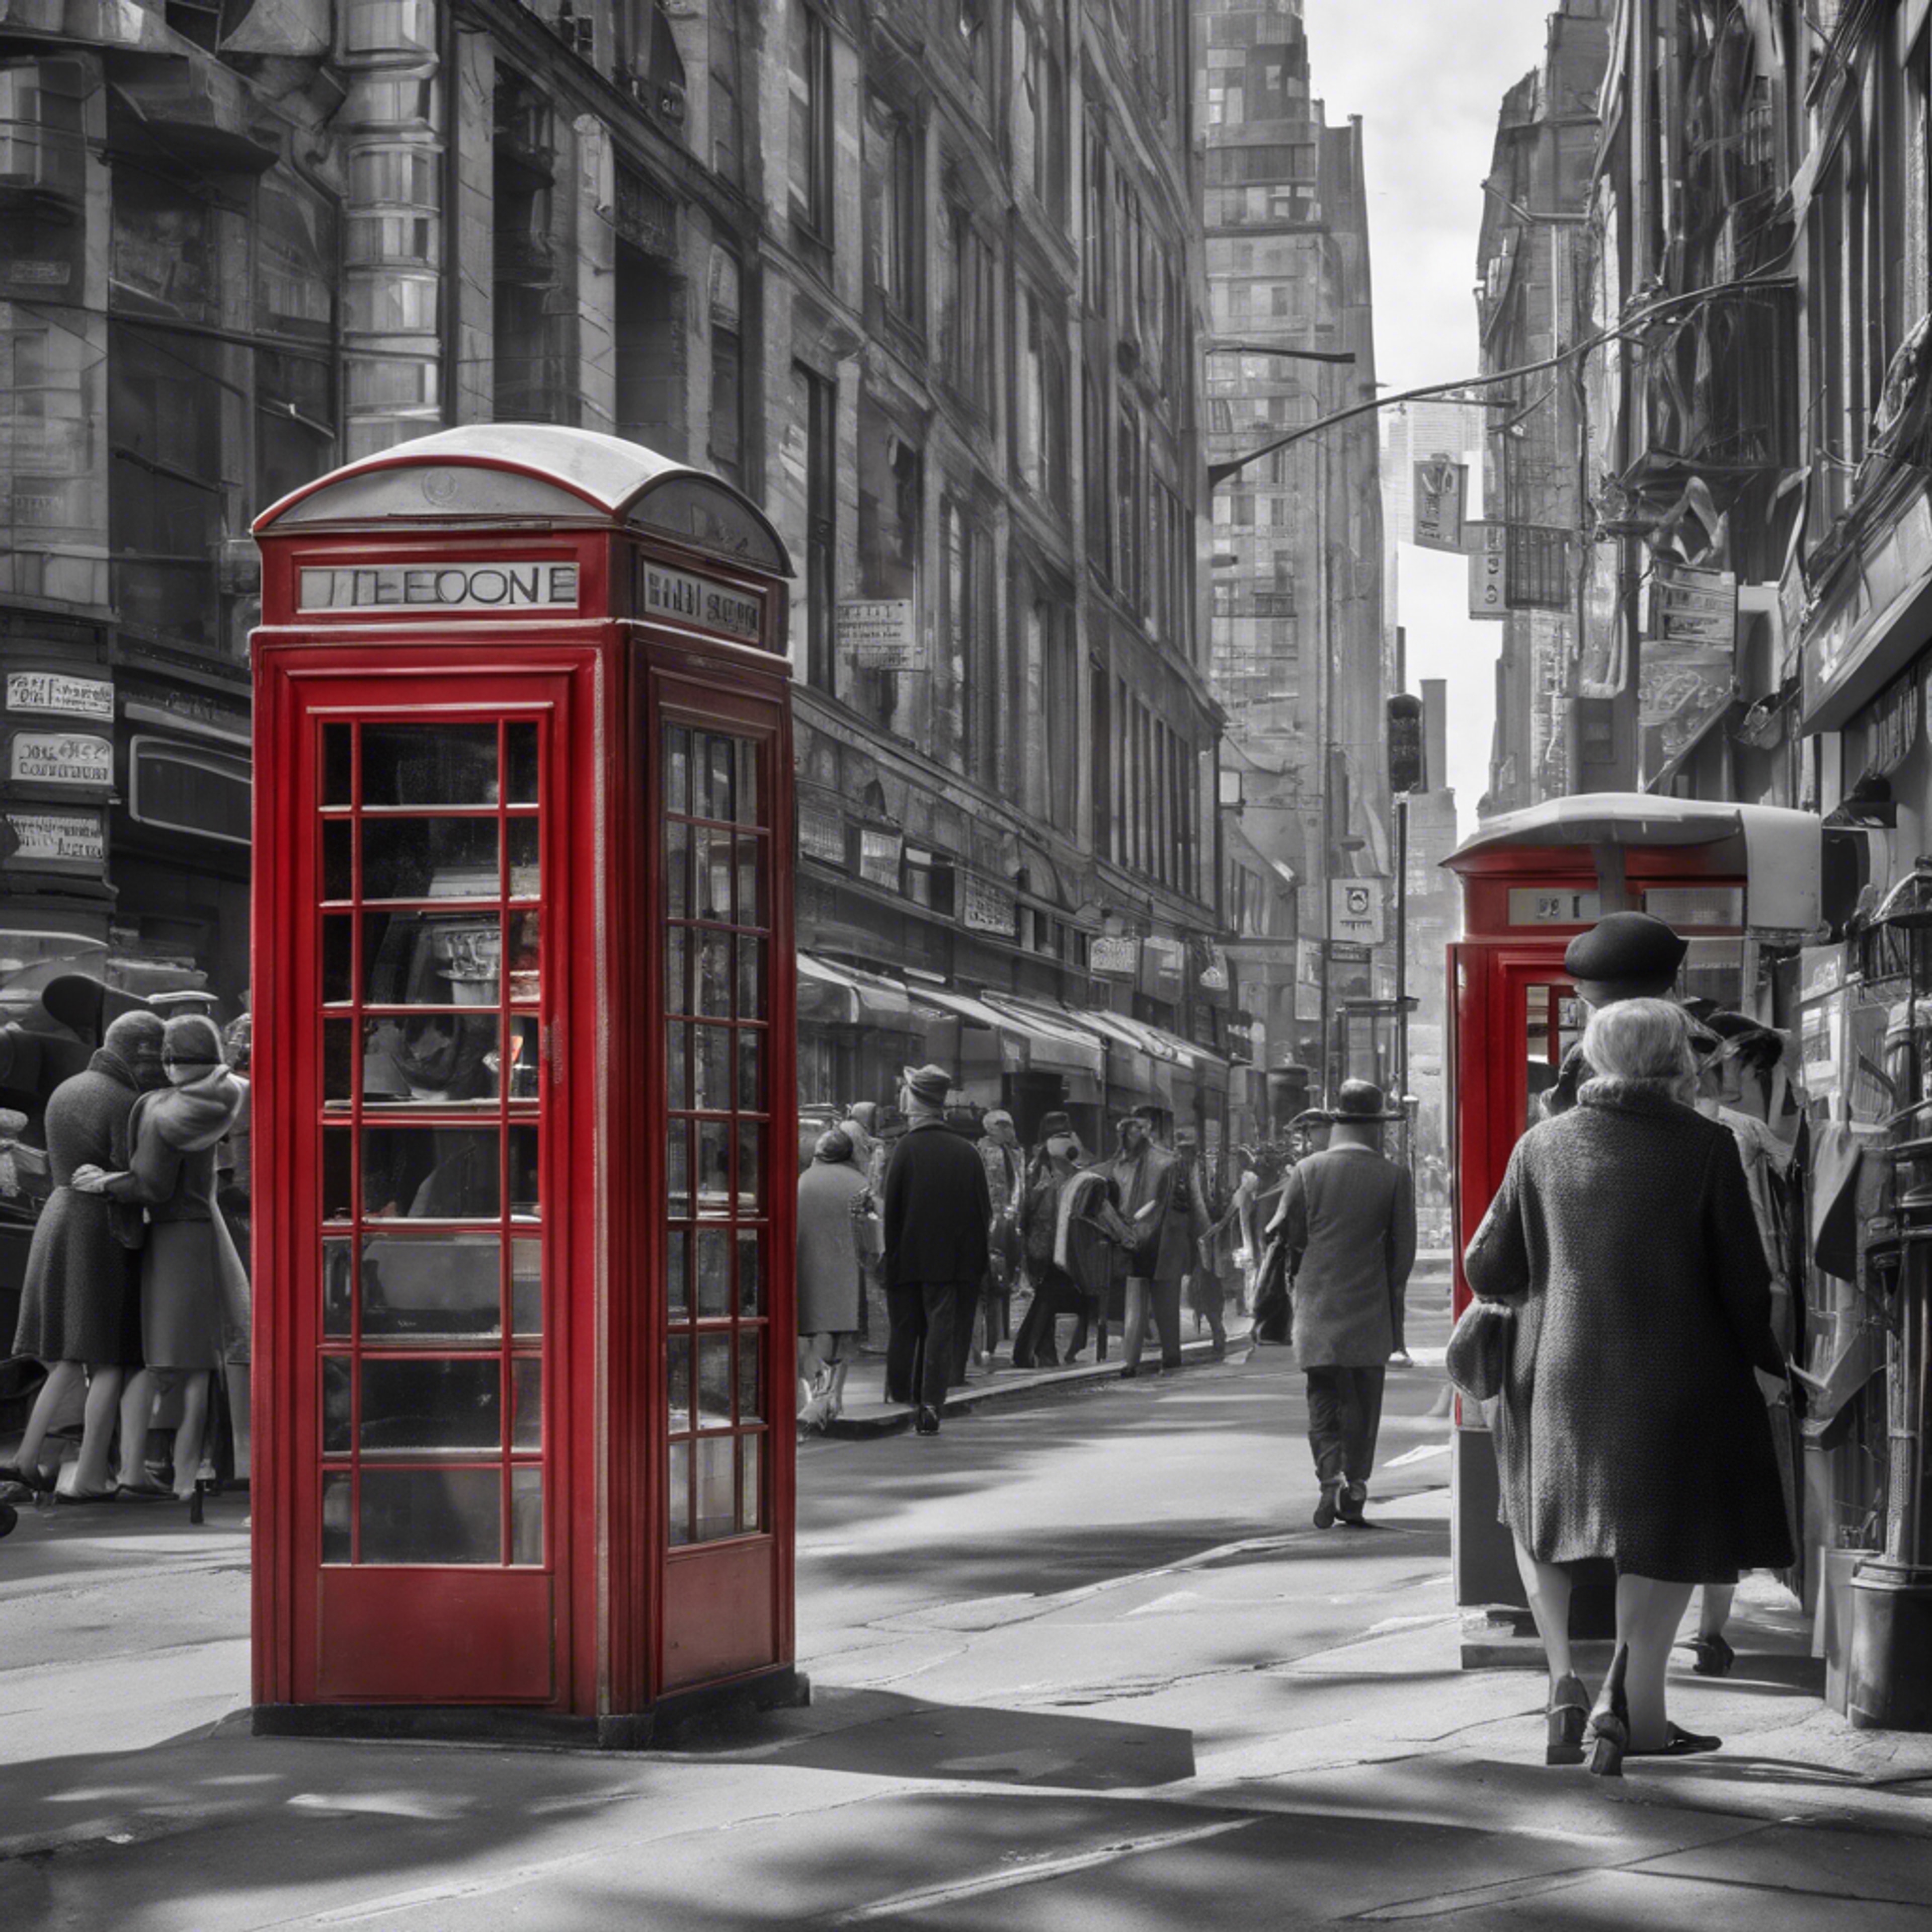 A black and white picture of a busy city street in the 1960s, with one characteristic iconic red phone booth. Wallpaper[8cad1b57085c4579b492]